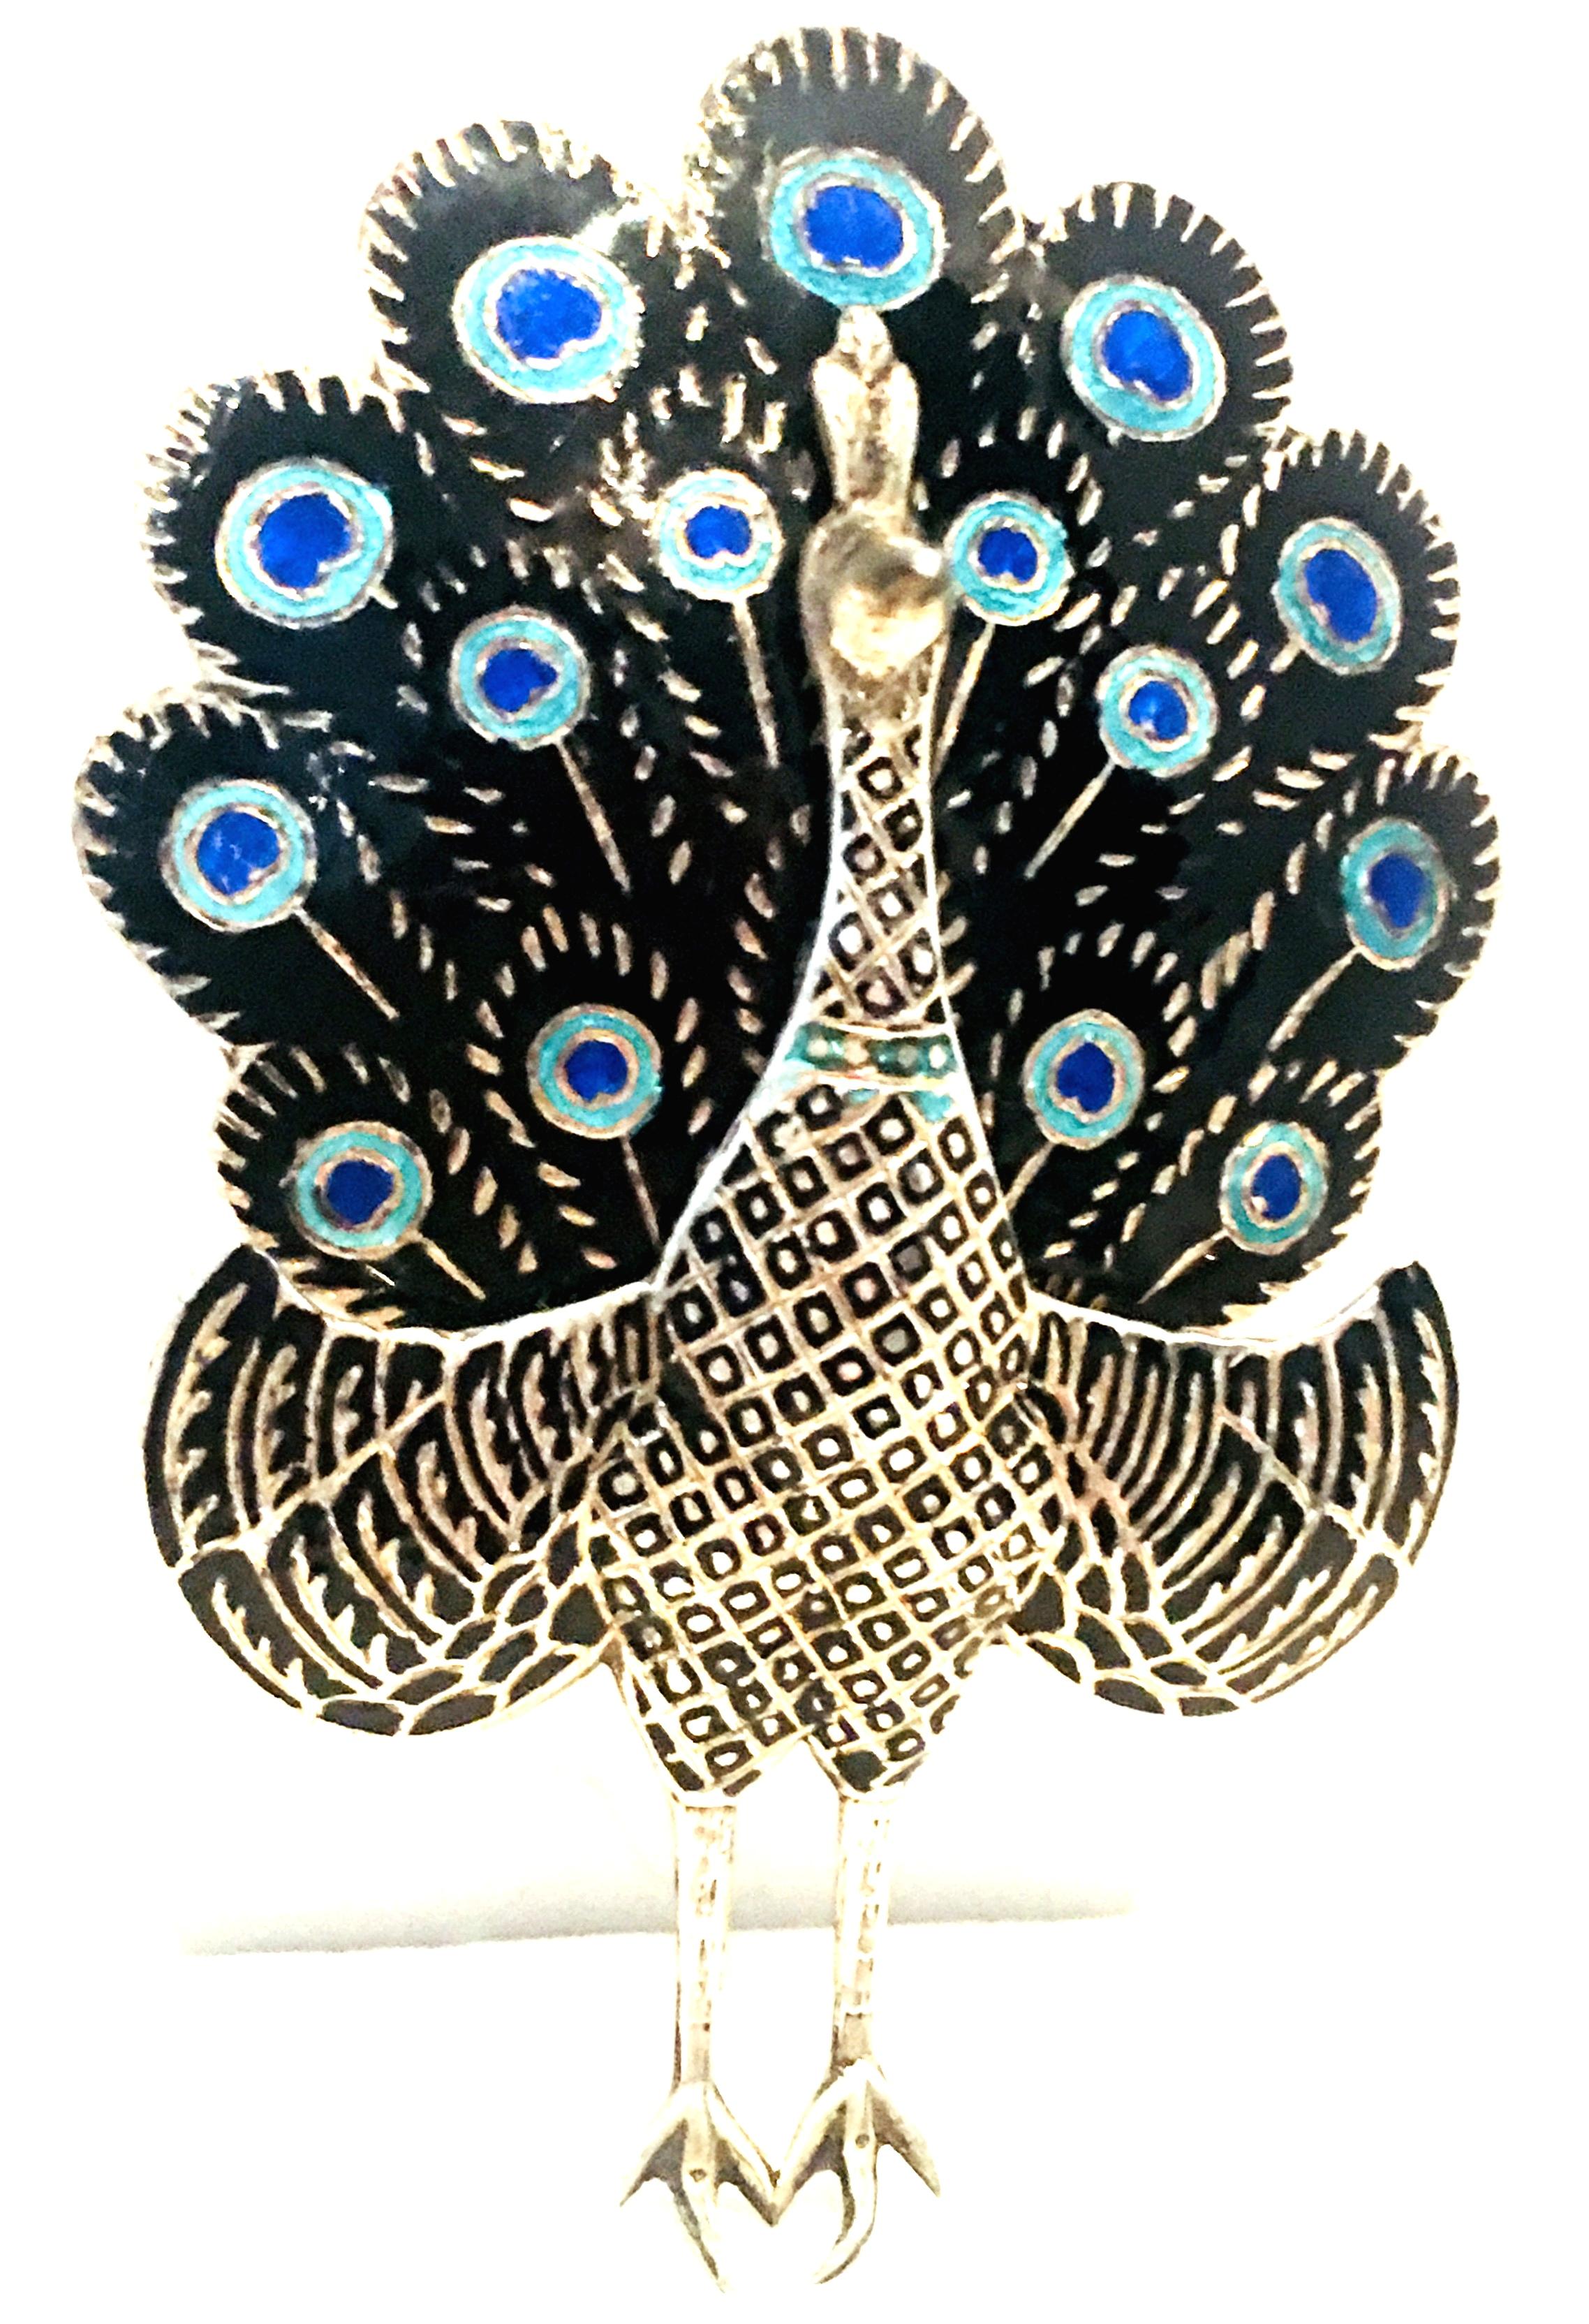 Mid-20th Century Sterling Silver & Enamel Articulating Peacock Brooch-Signed,
Siam Sterling.
Total weight, 18 grams.